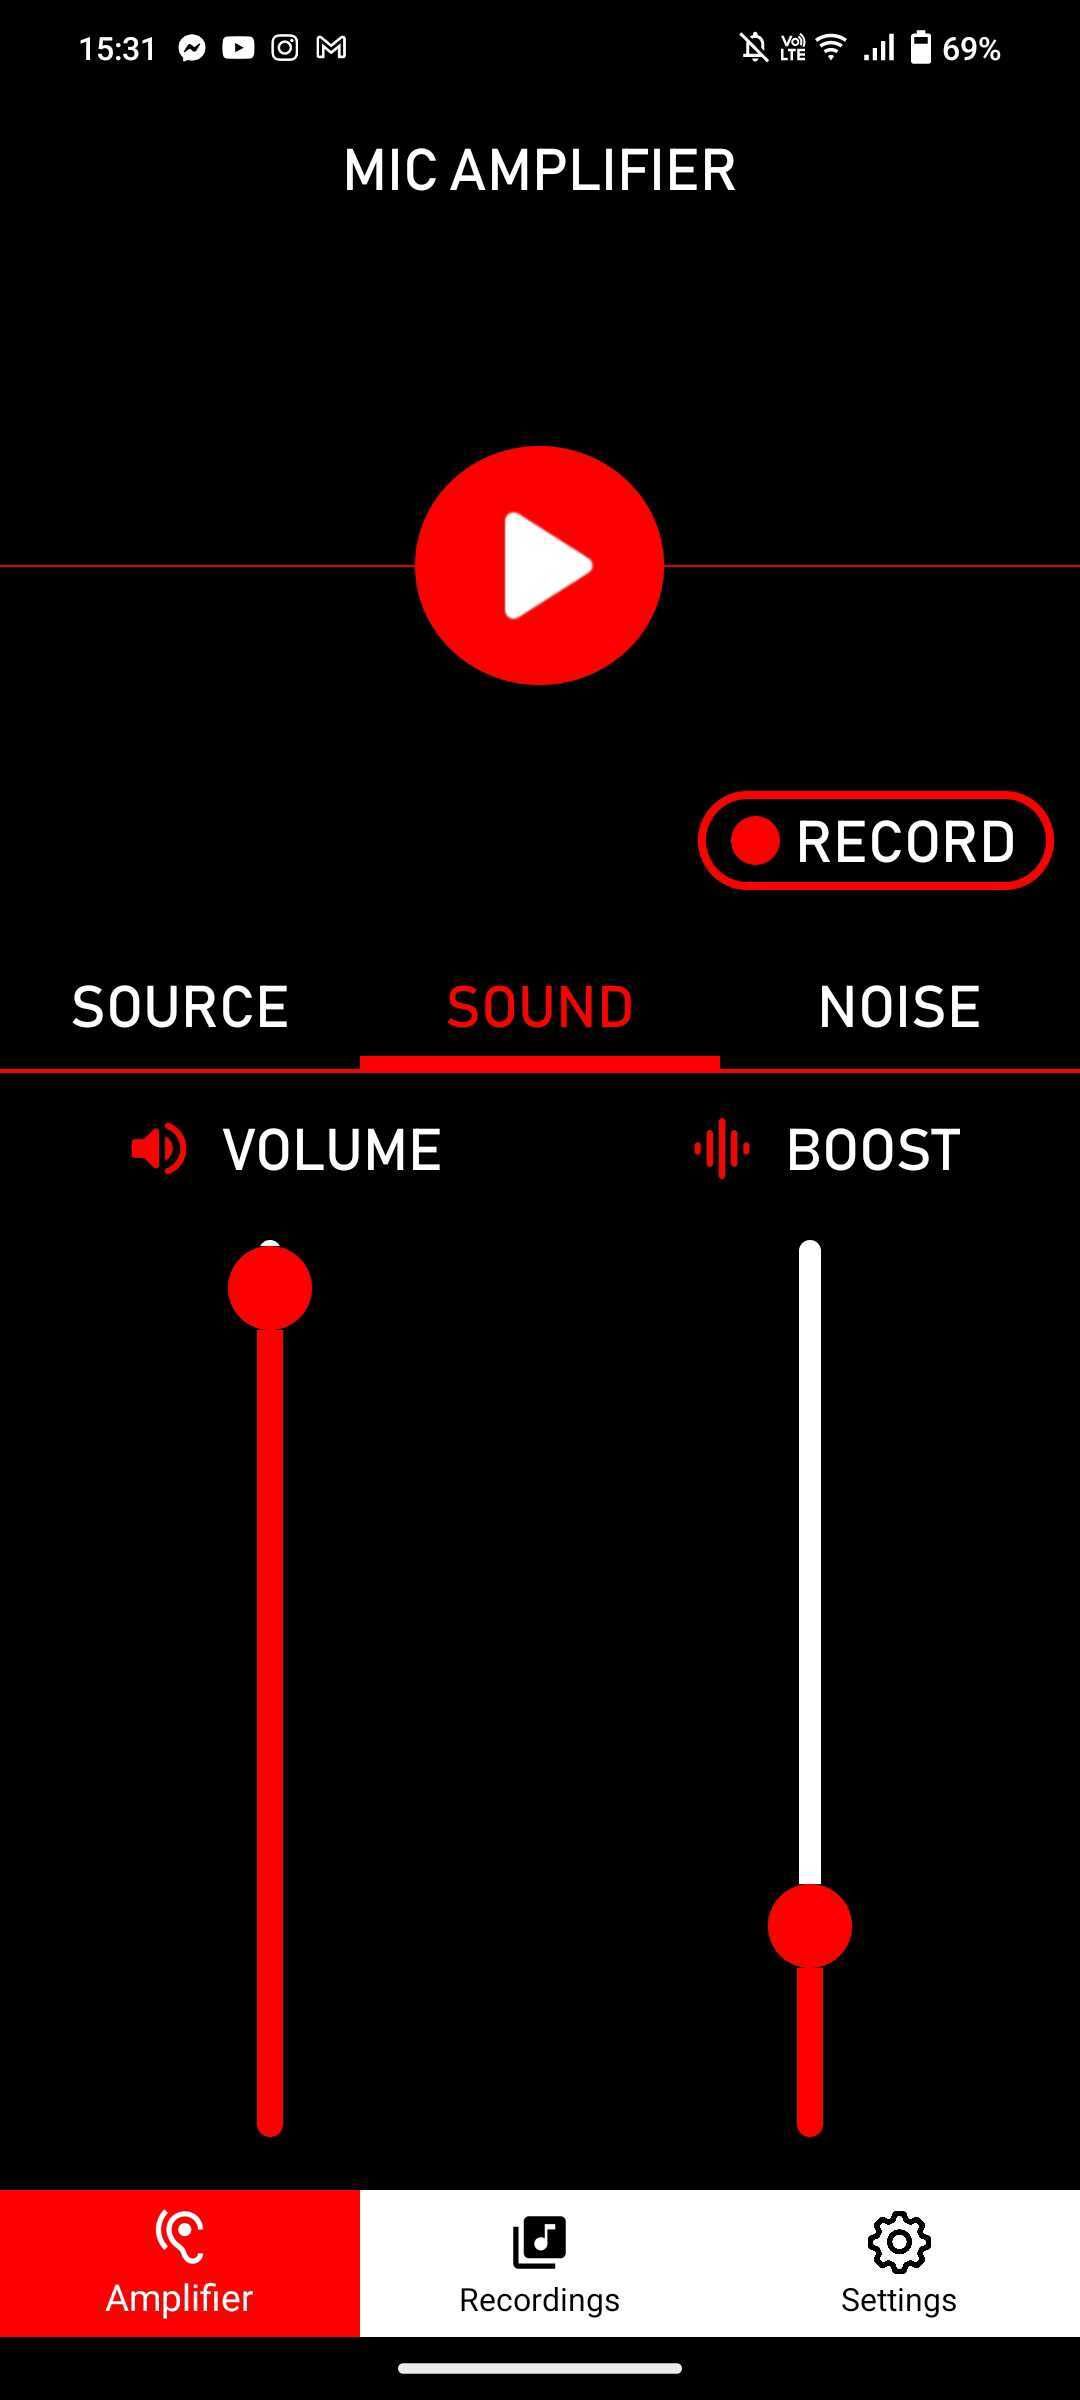 Mic Amplifier on Android sound tab